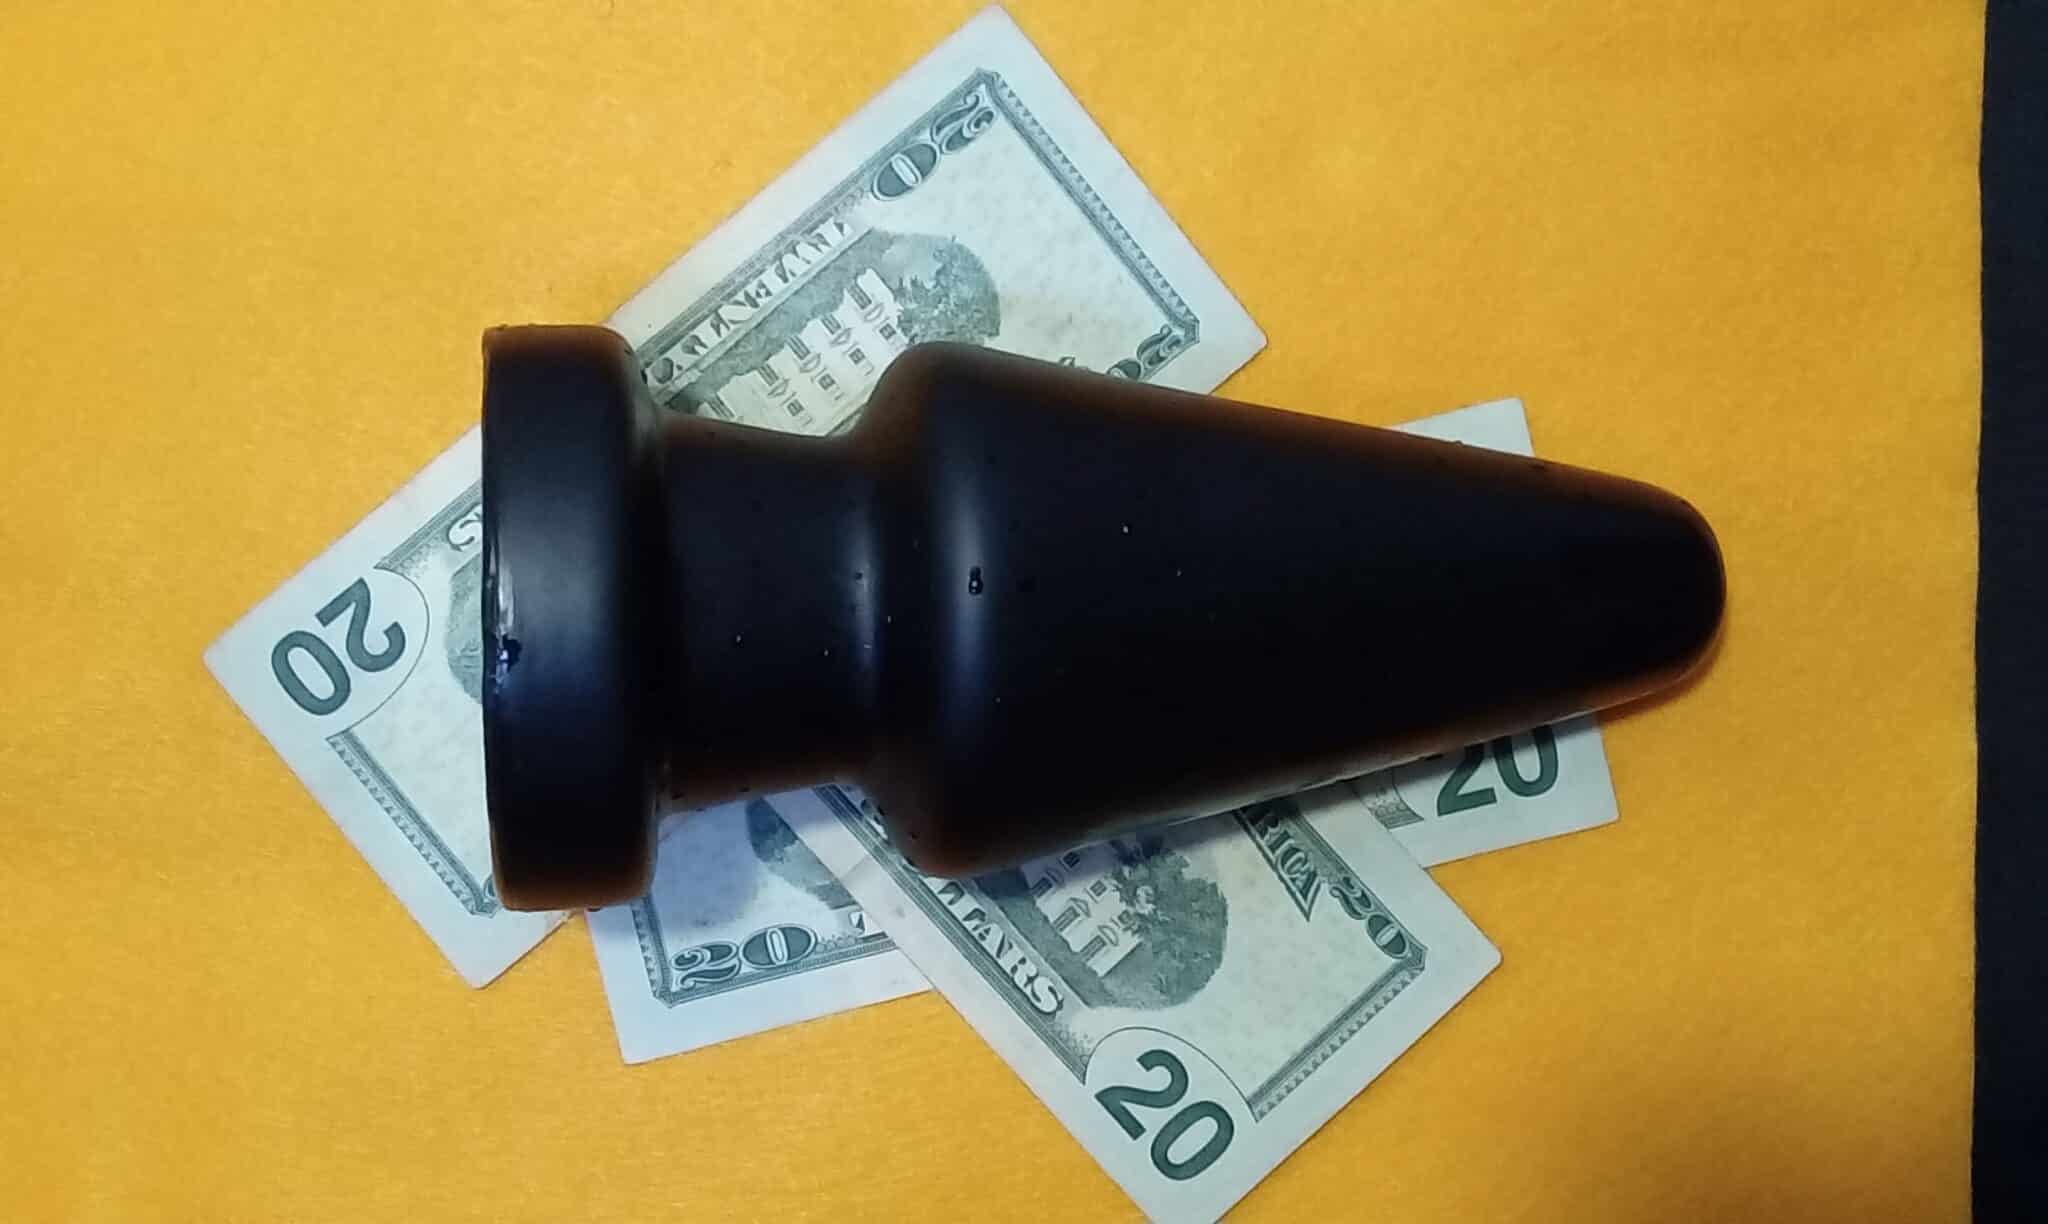 Oxy Anal Slaughter Huge Butt Plug The Oxy Anal Slaughter Huge Butt Plug: Balancing Quality and Cost